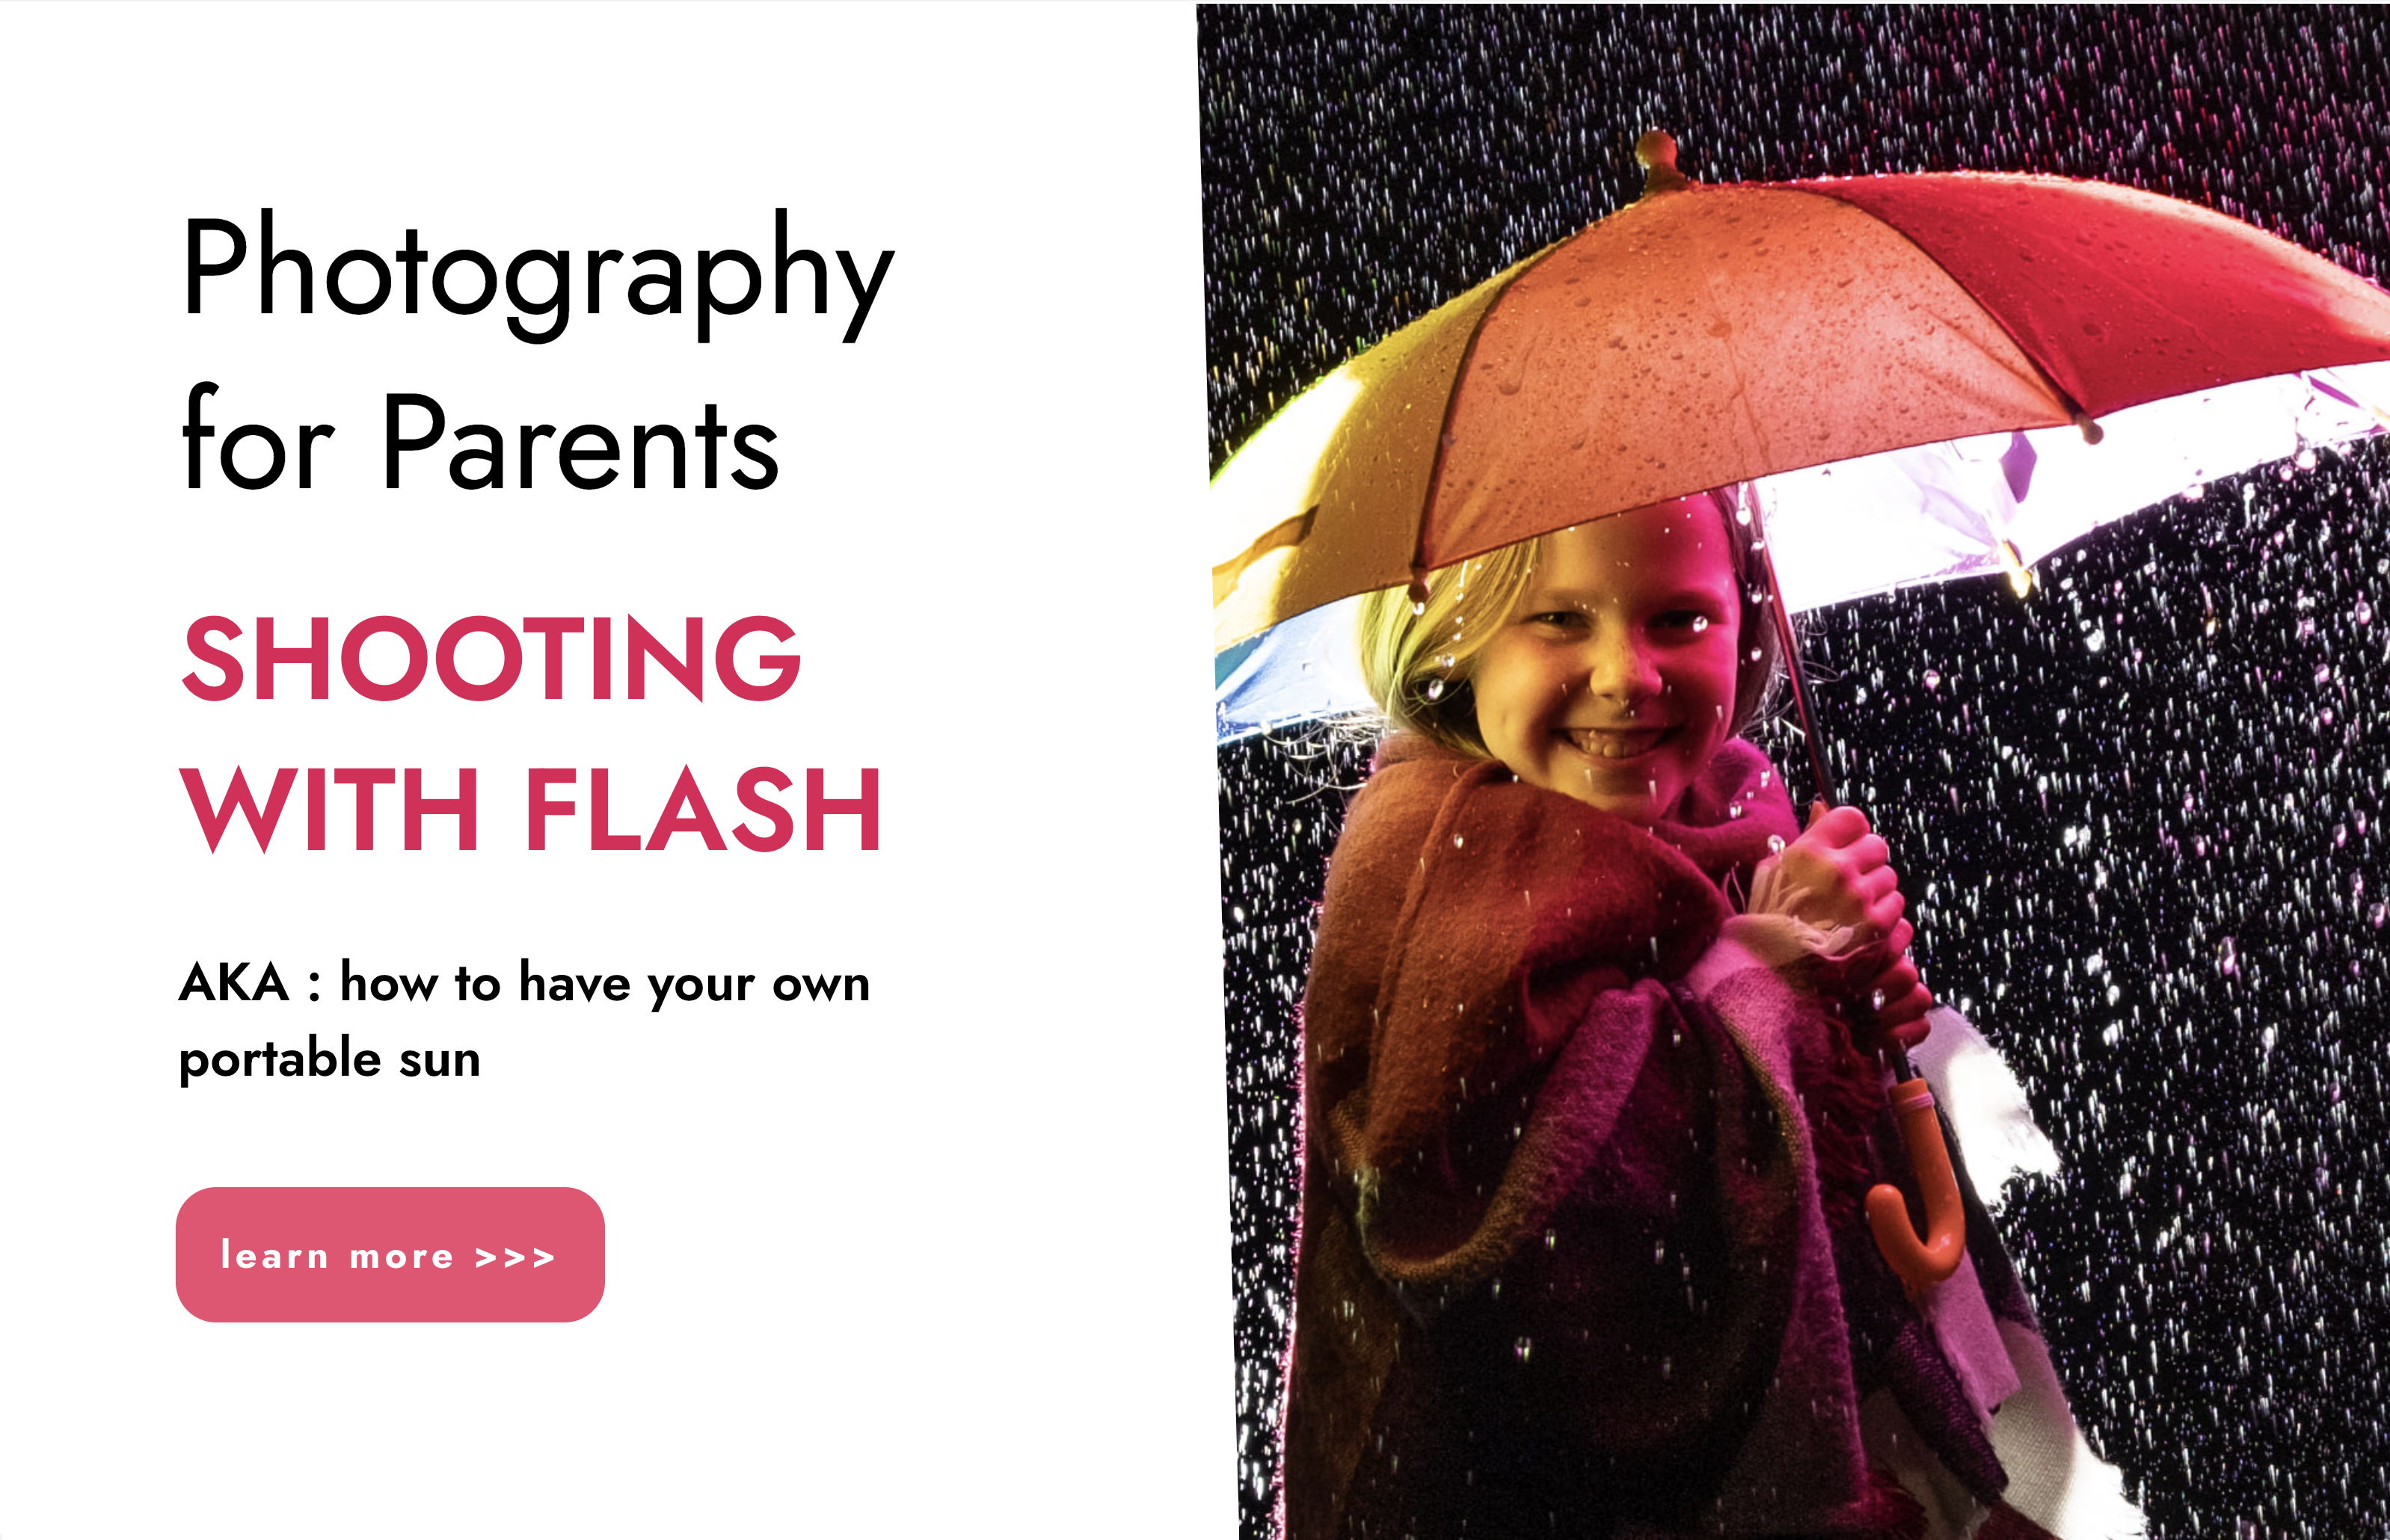 Photography for Parents - Shooting with Flash